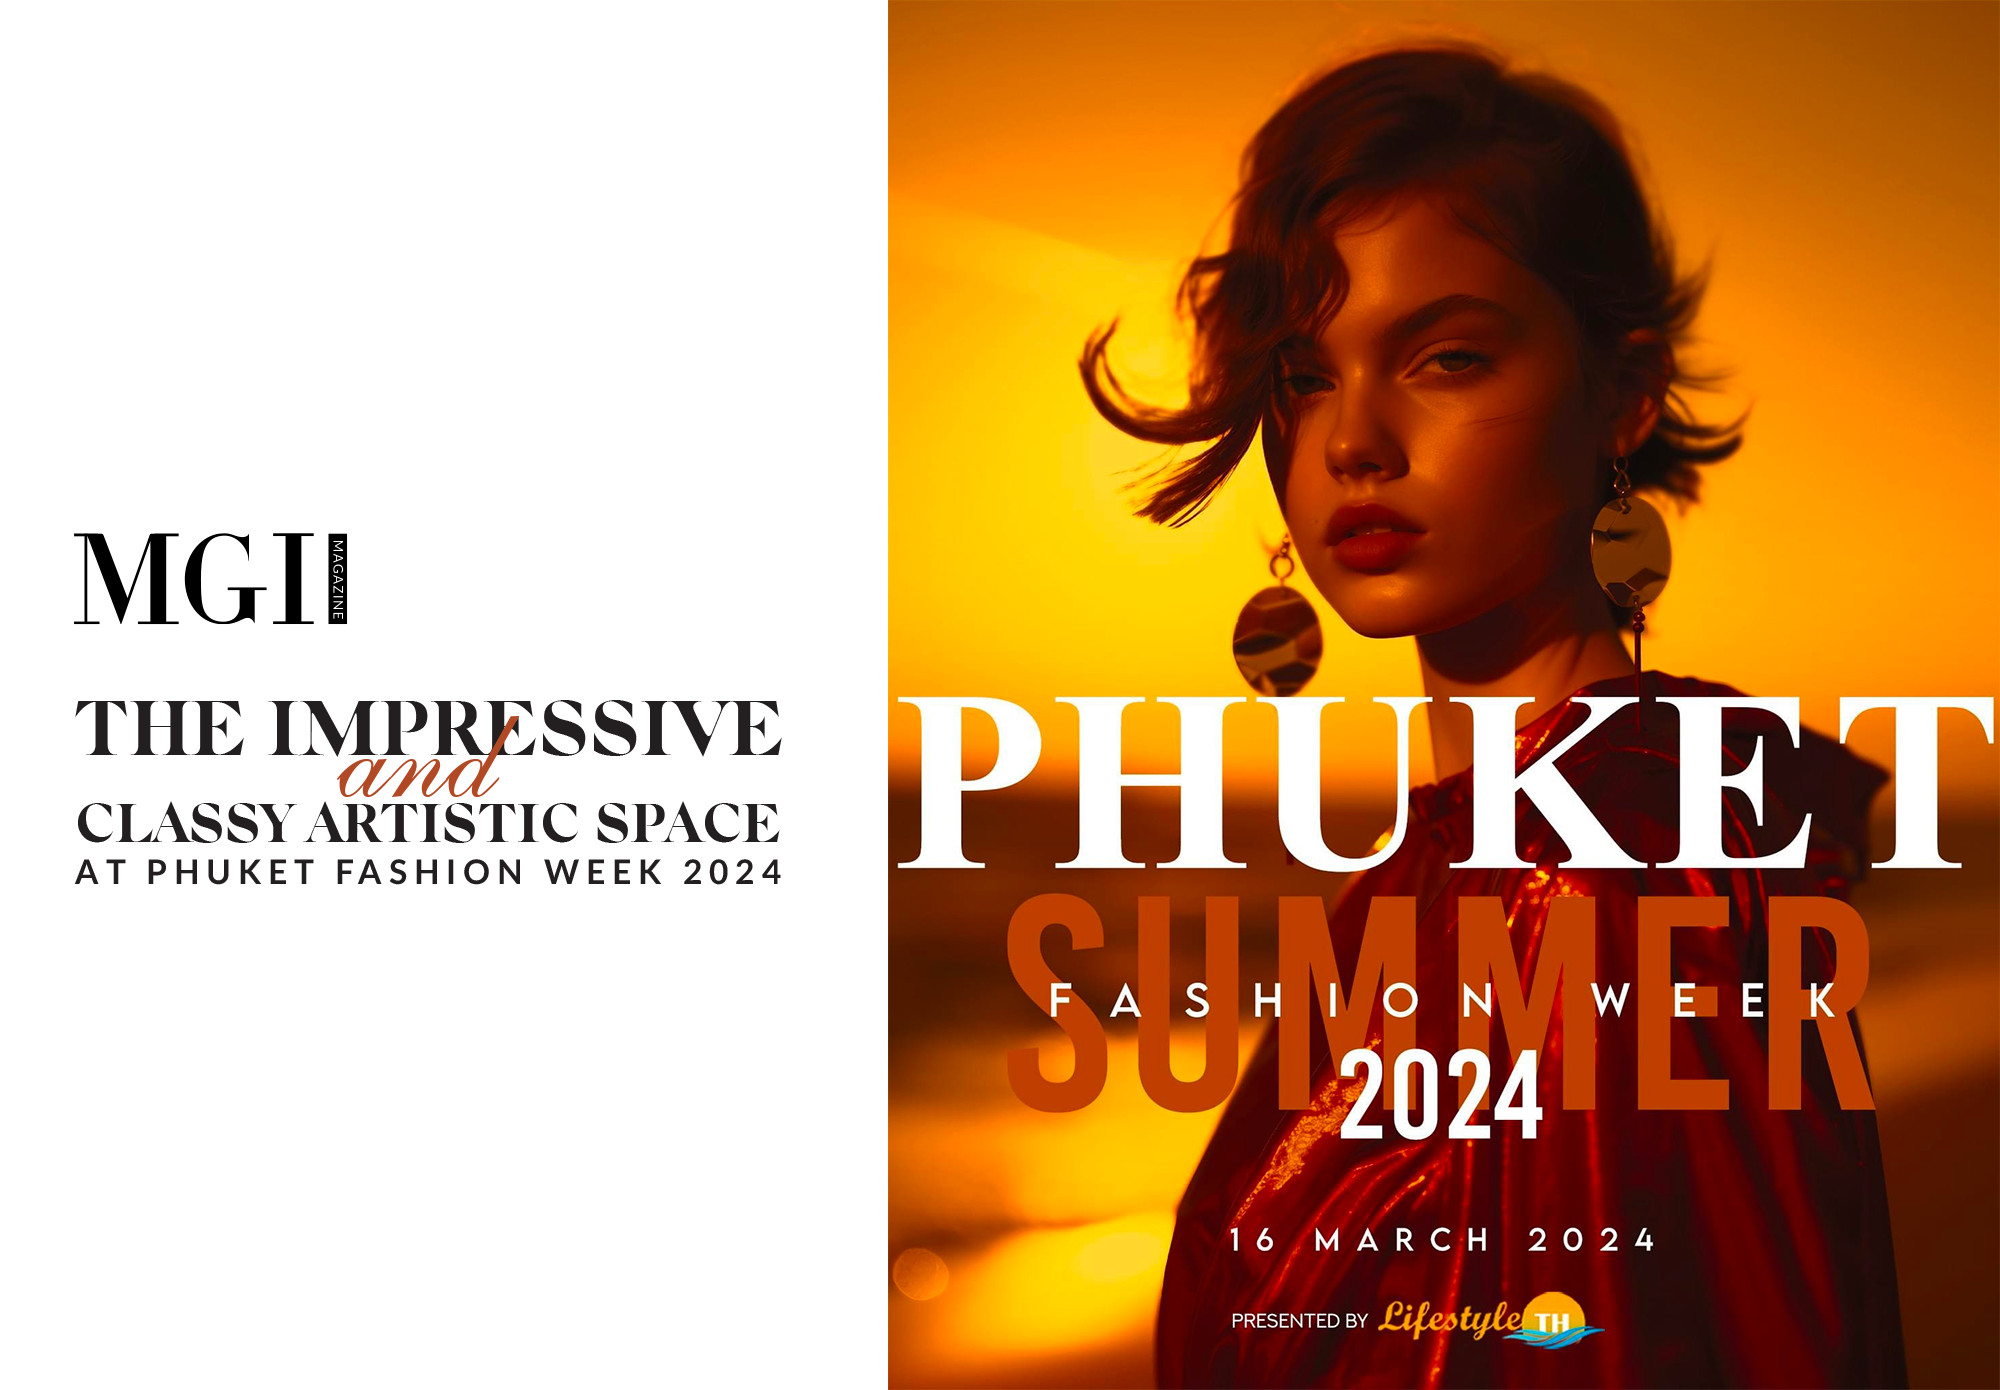 The impressive and classy artistic space at Phuket Fashion Week 2024